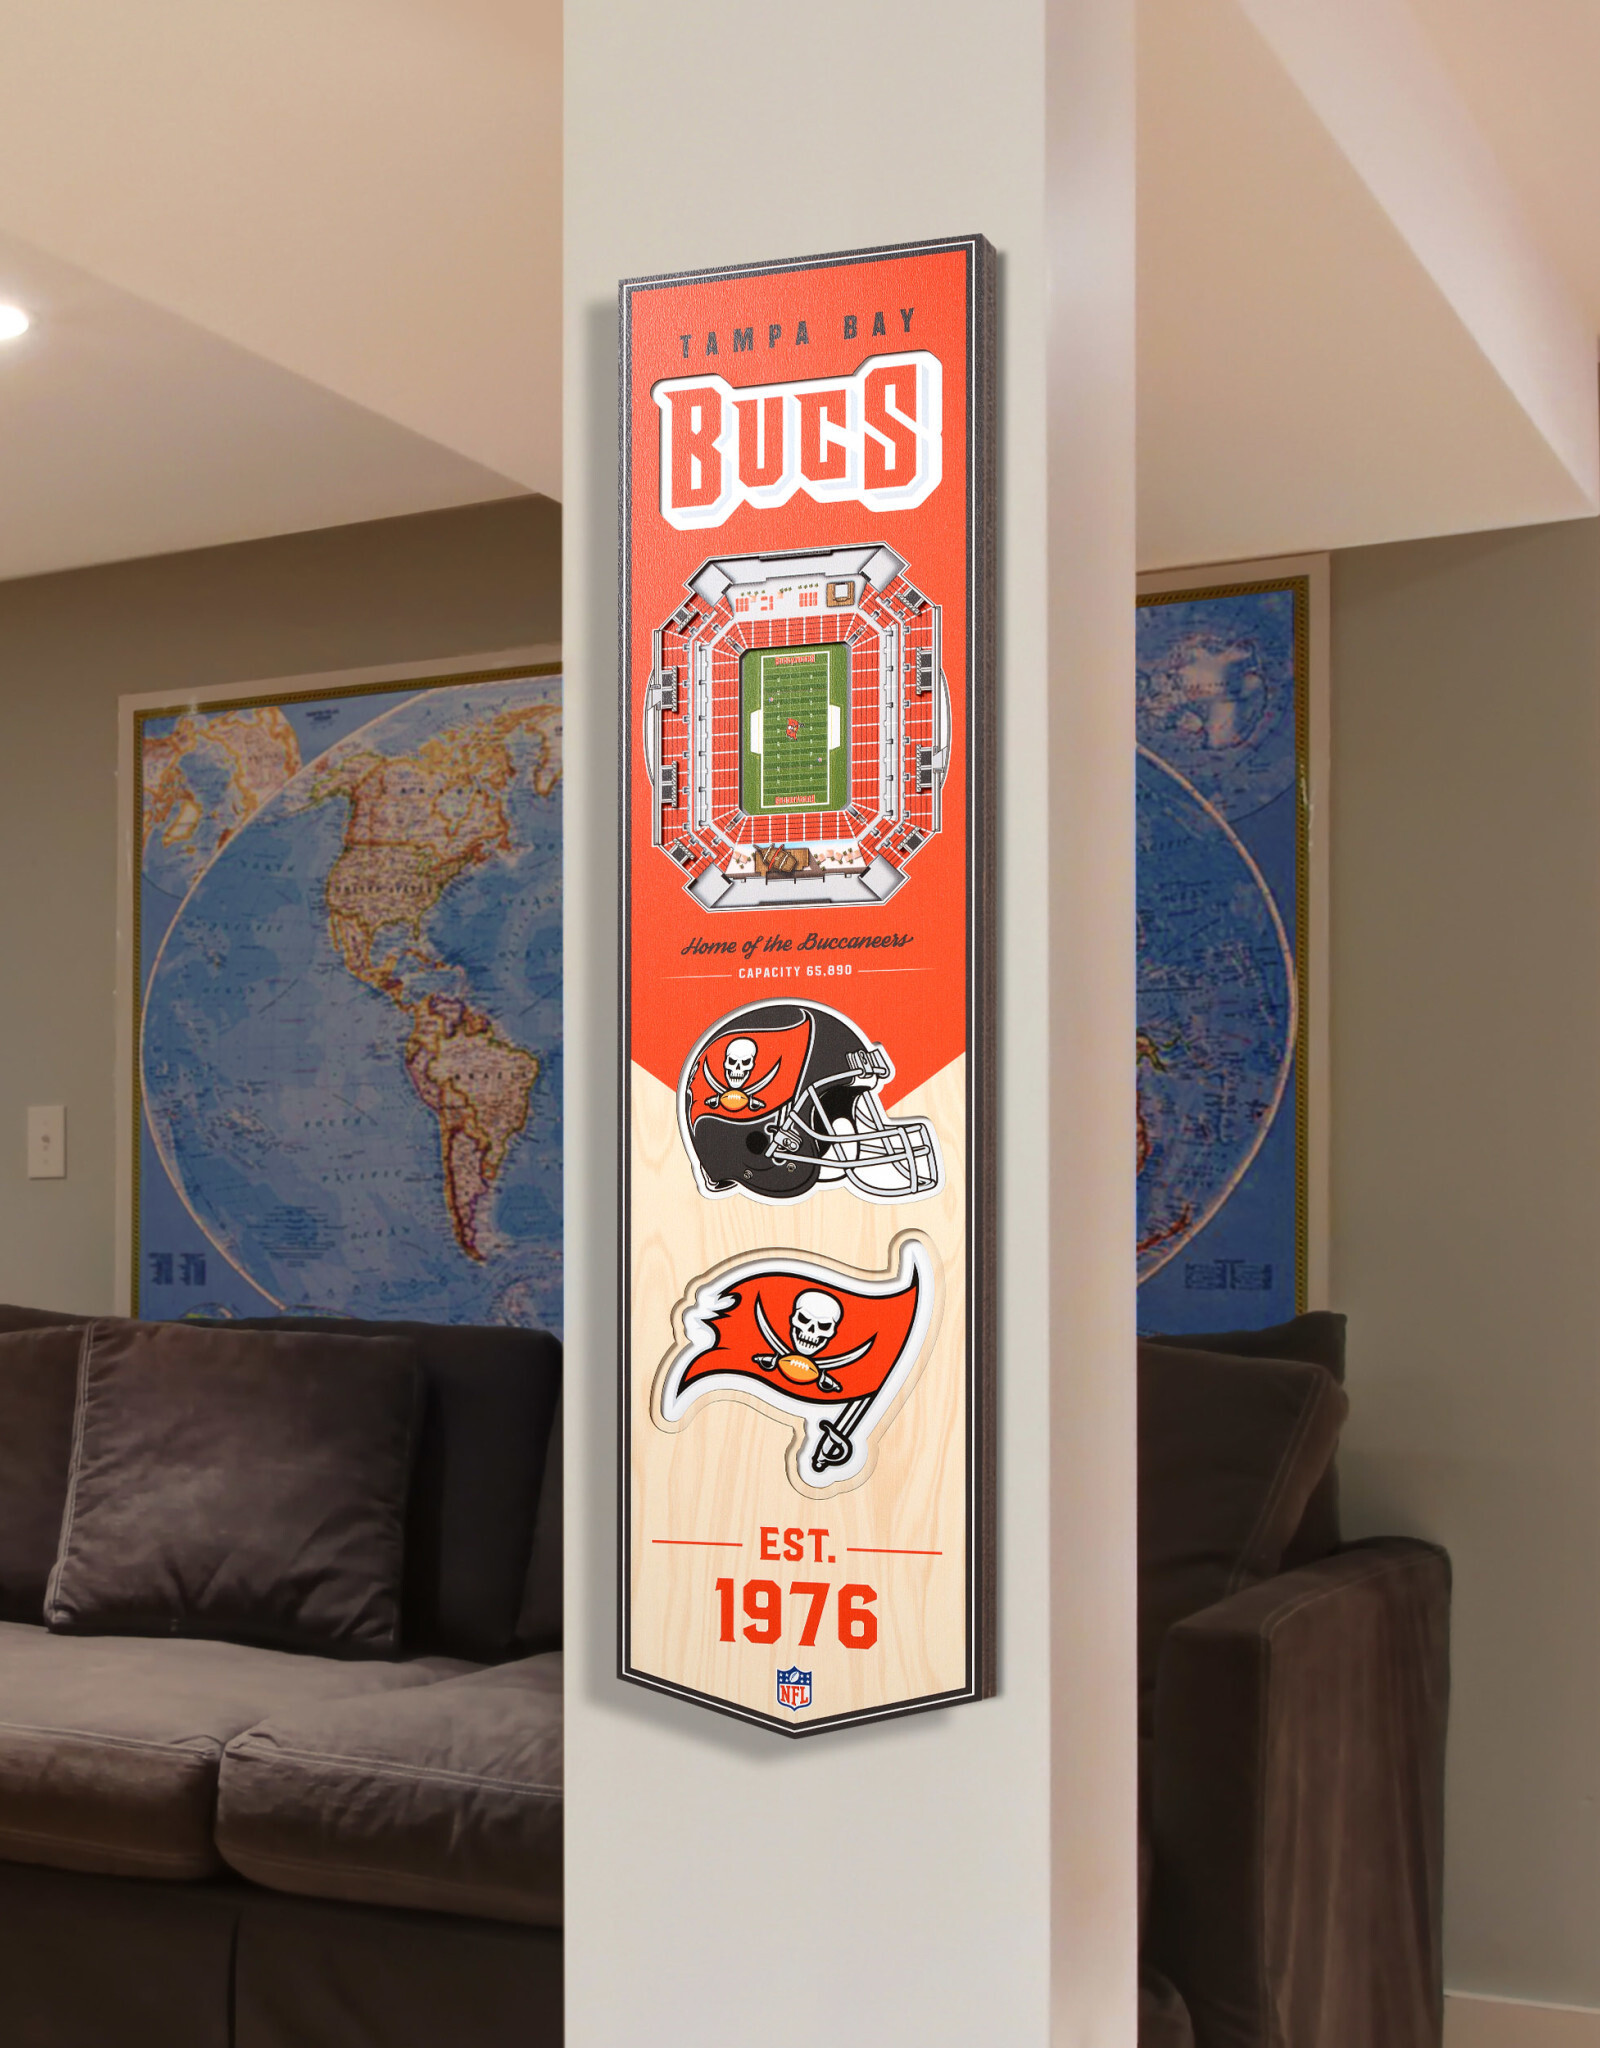 YOU THE FAN Tampa Bay Buccaneers 3D StadiumView 8x32 Banner